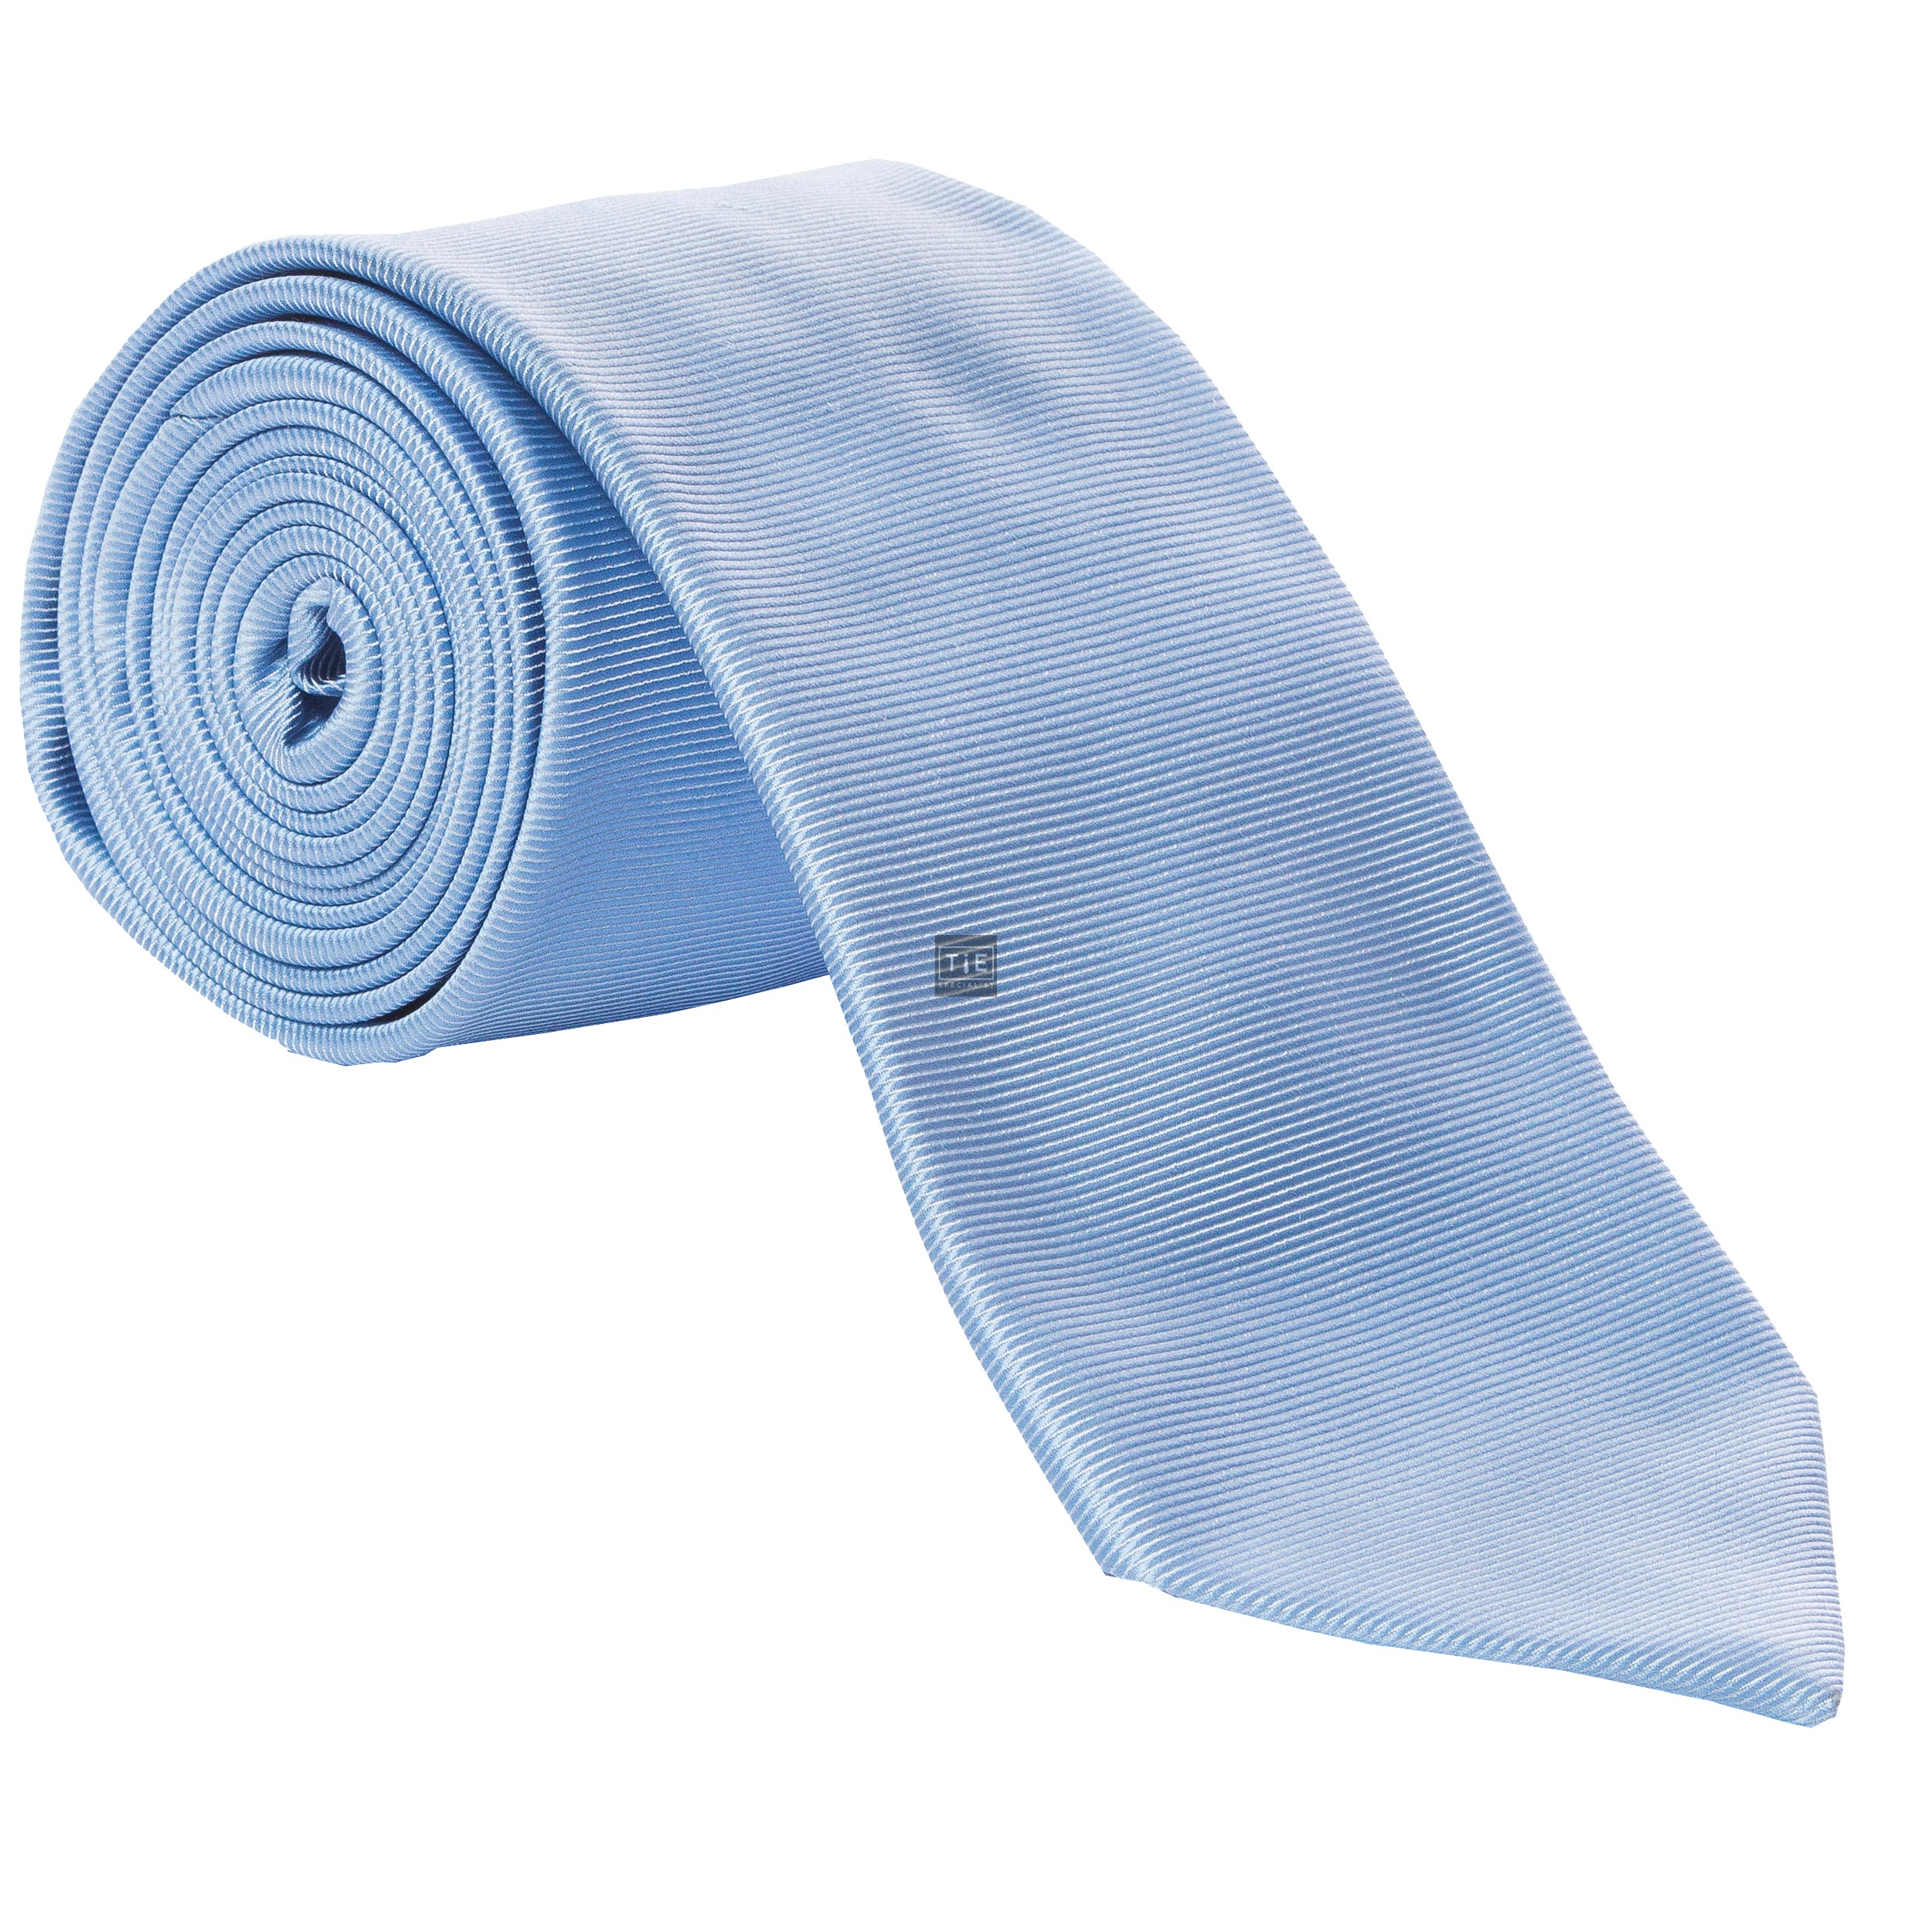 Blue Fine Twill Tie with Matching Pocket Square